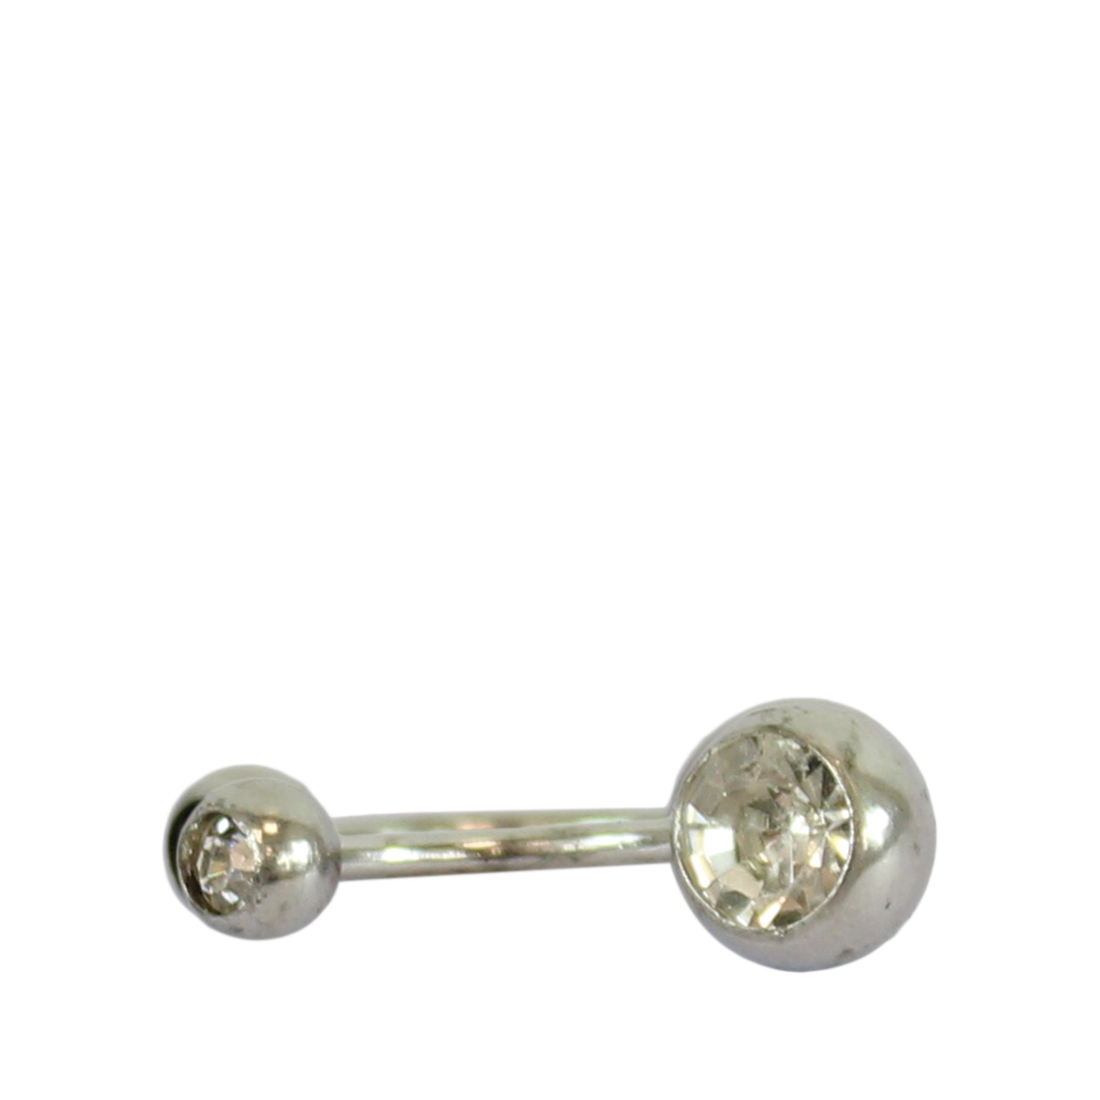 * Belly button ring with diamond